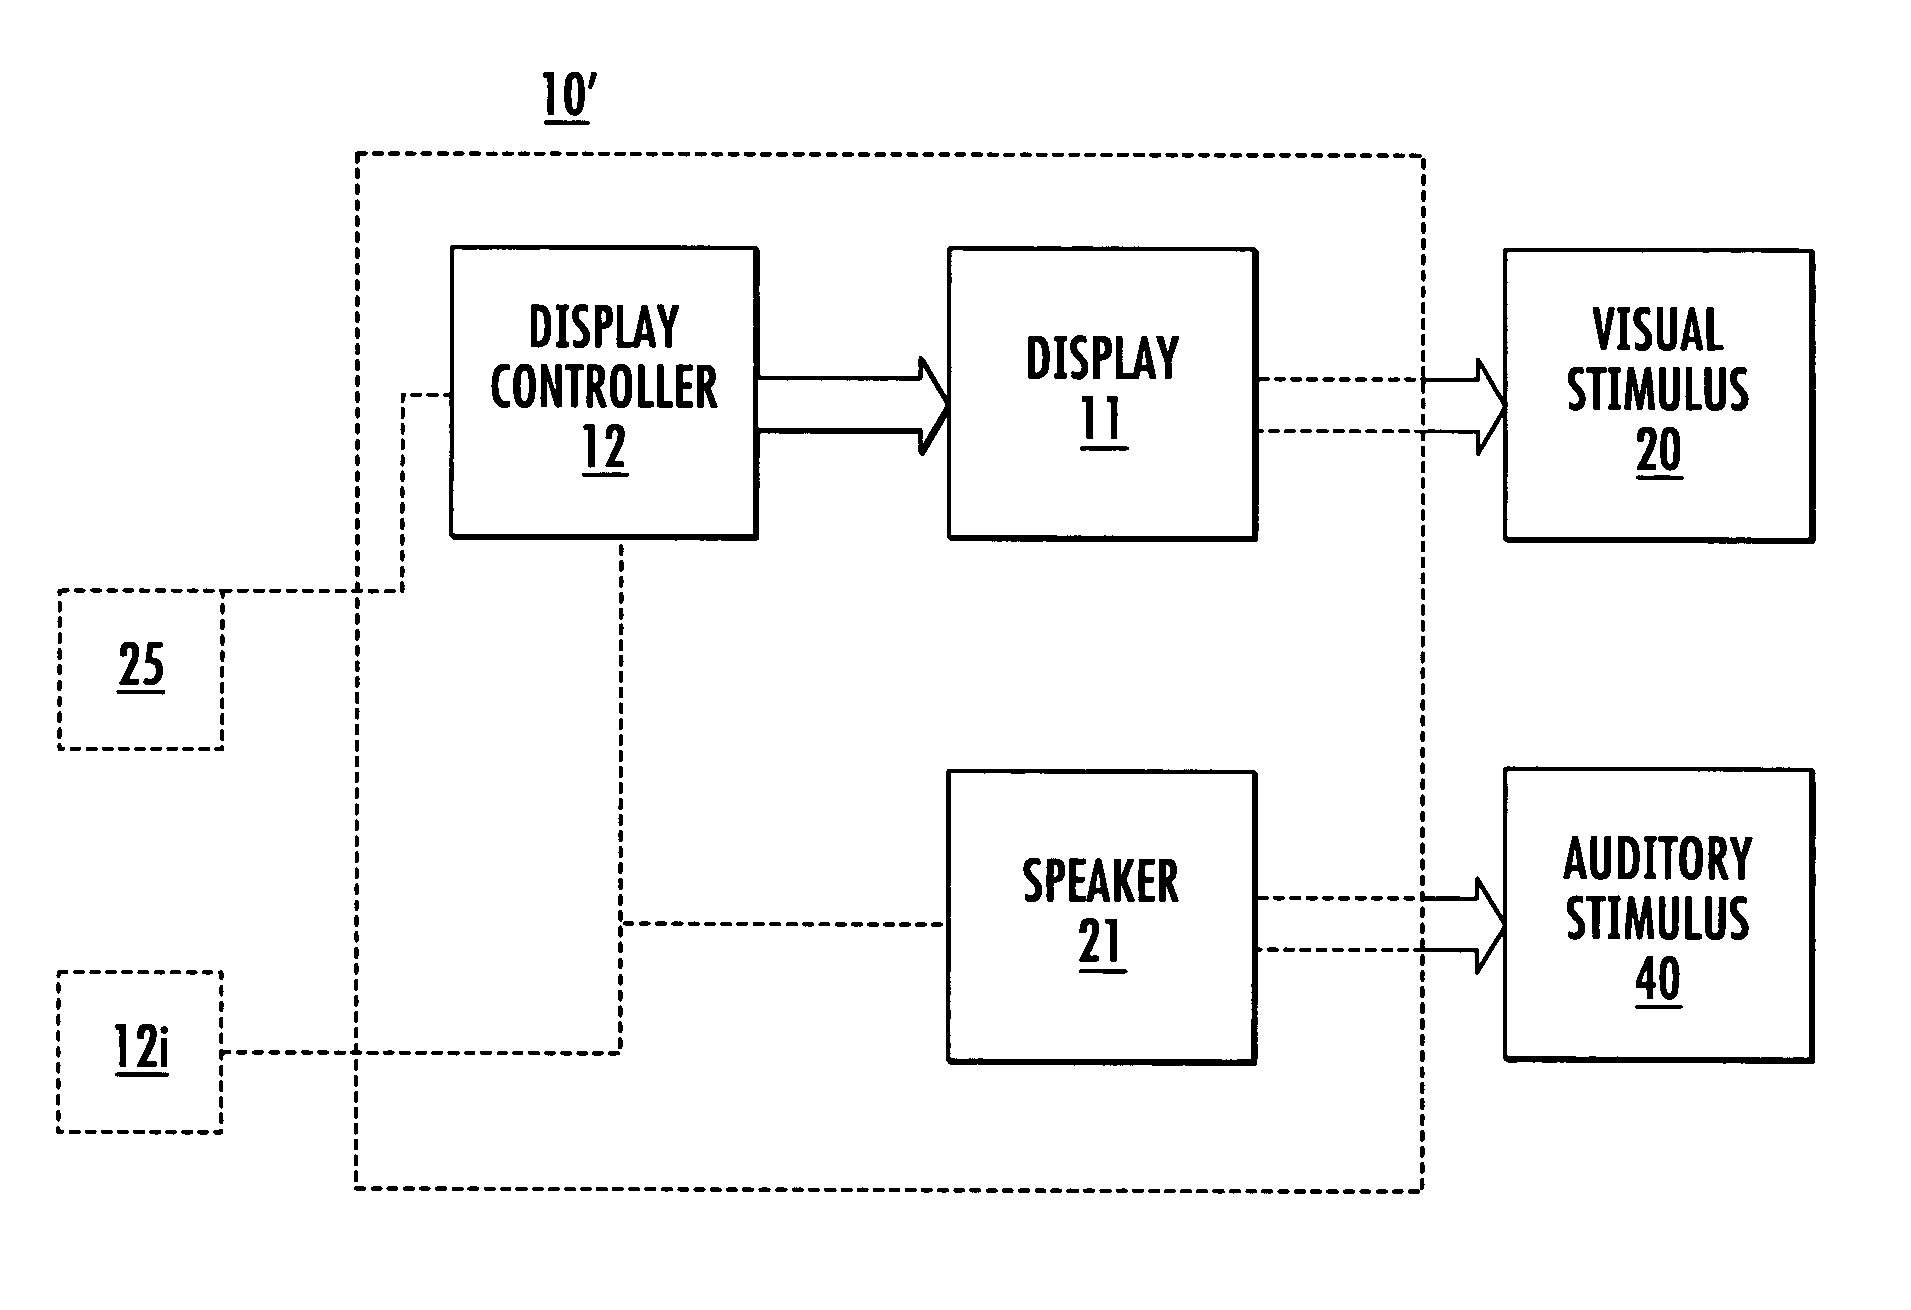 Methods and devices for enhancing fluency in persons who stutter employing visual speech gestures